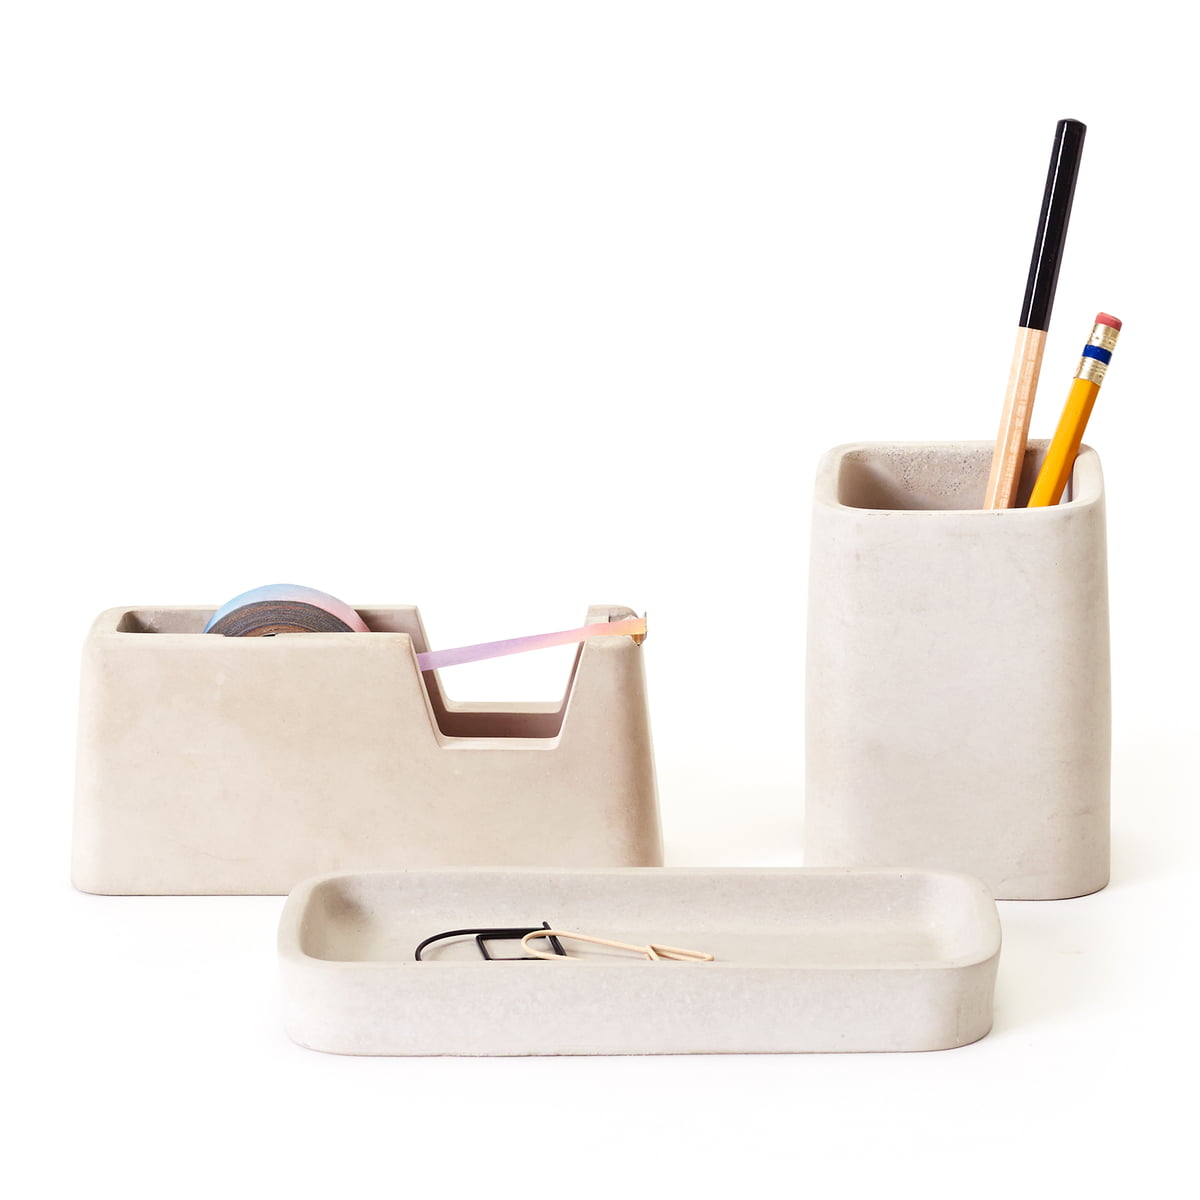 Cool Concrete Desk Accessories Collection - DigsDigs